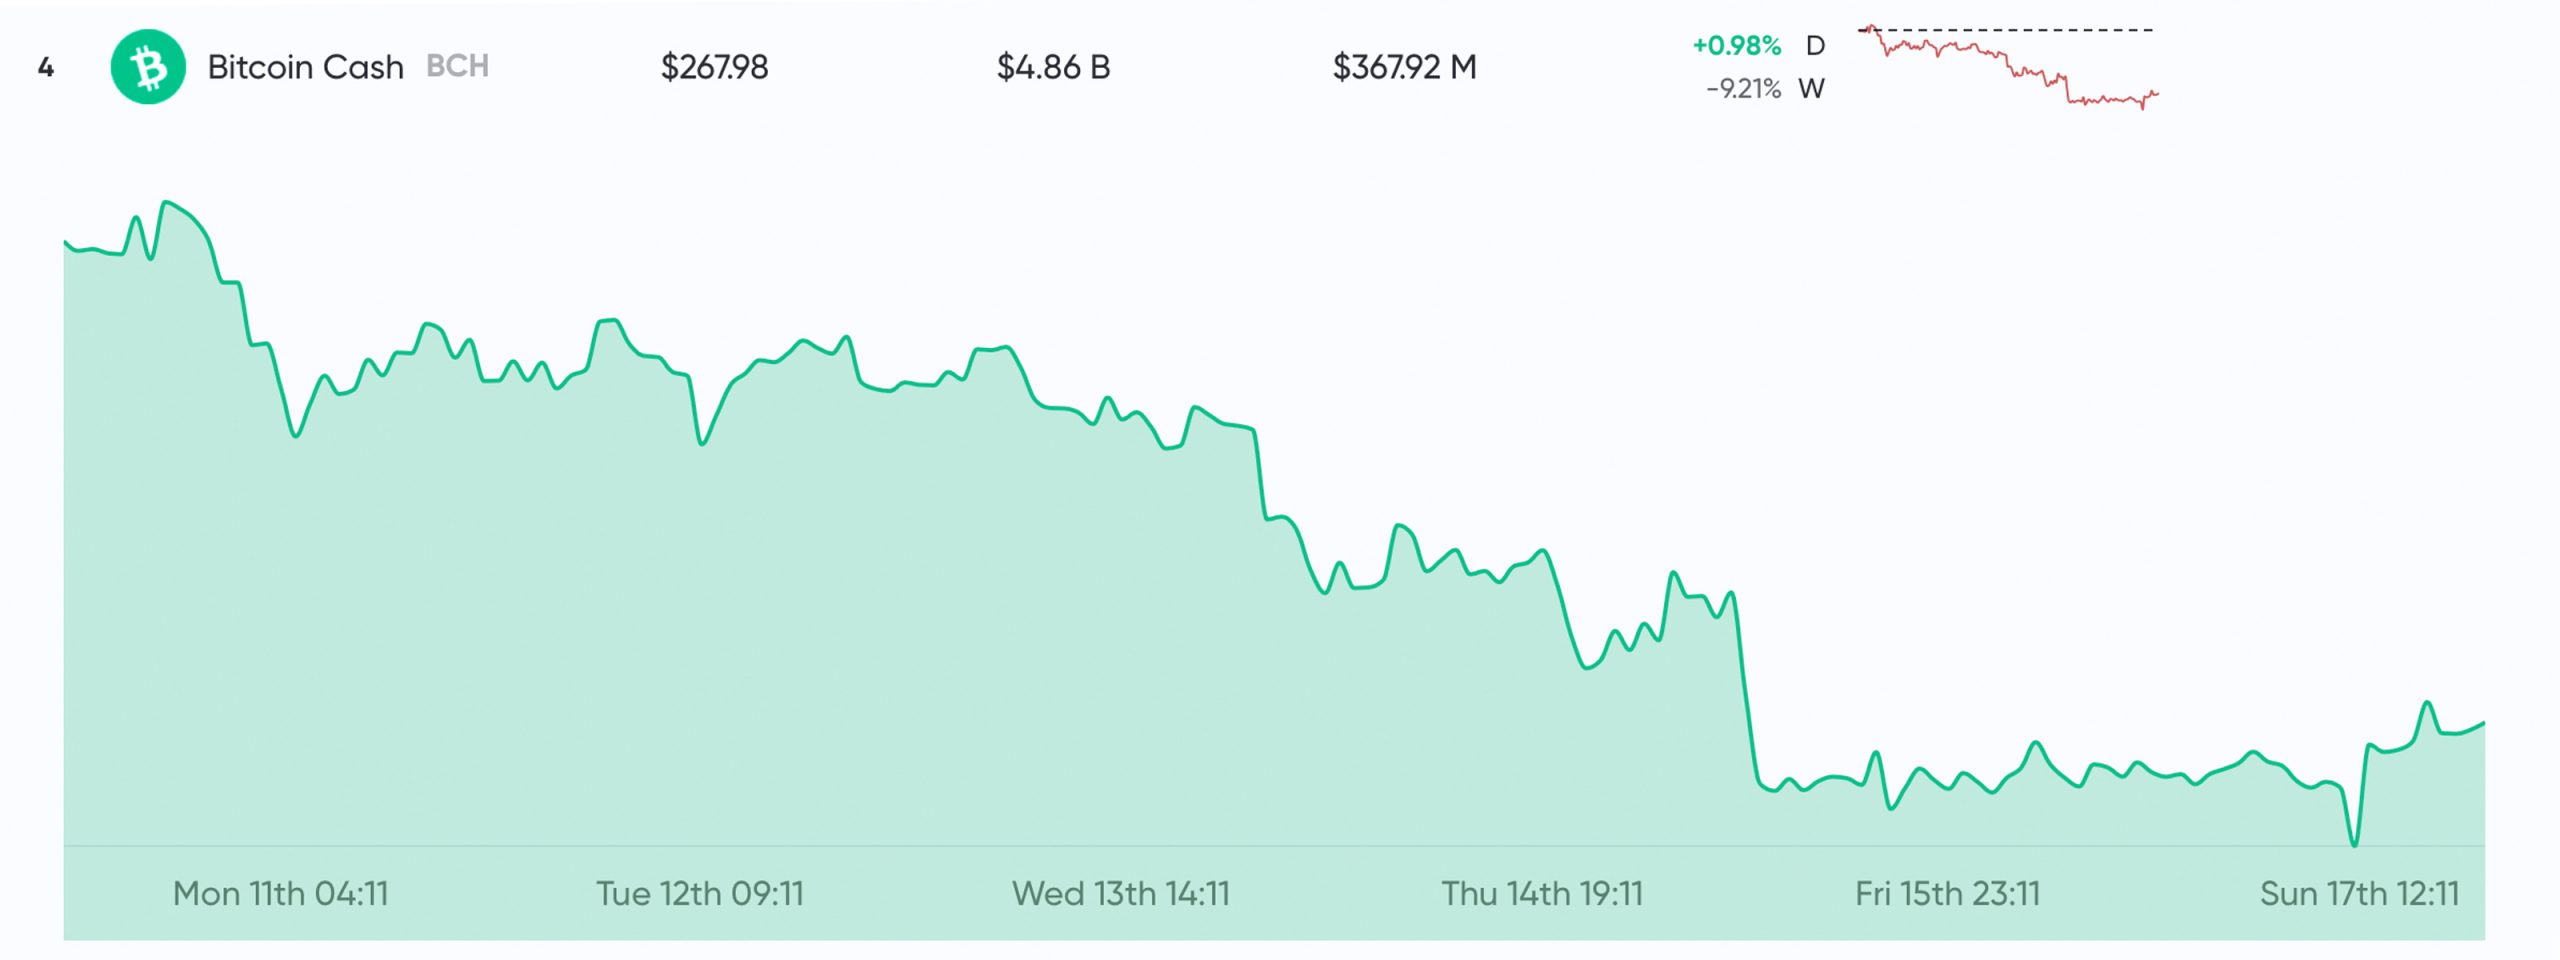 Market Update: Crypto Prices Improve After 3-Week Downtrend